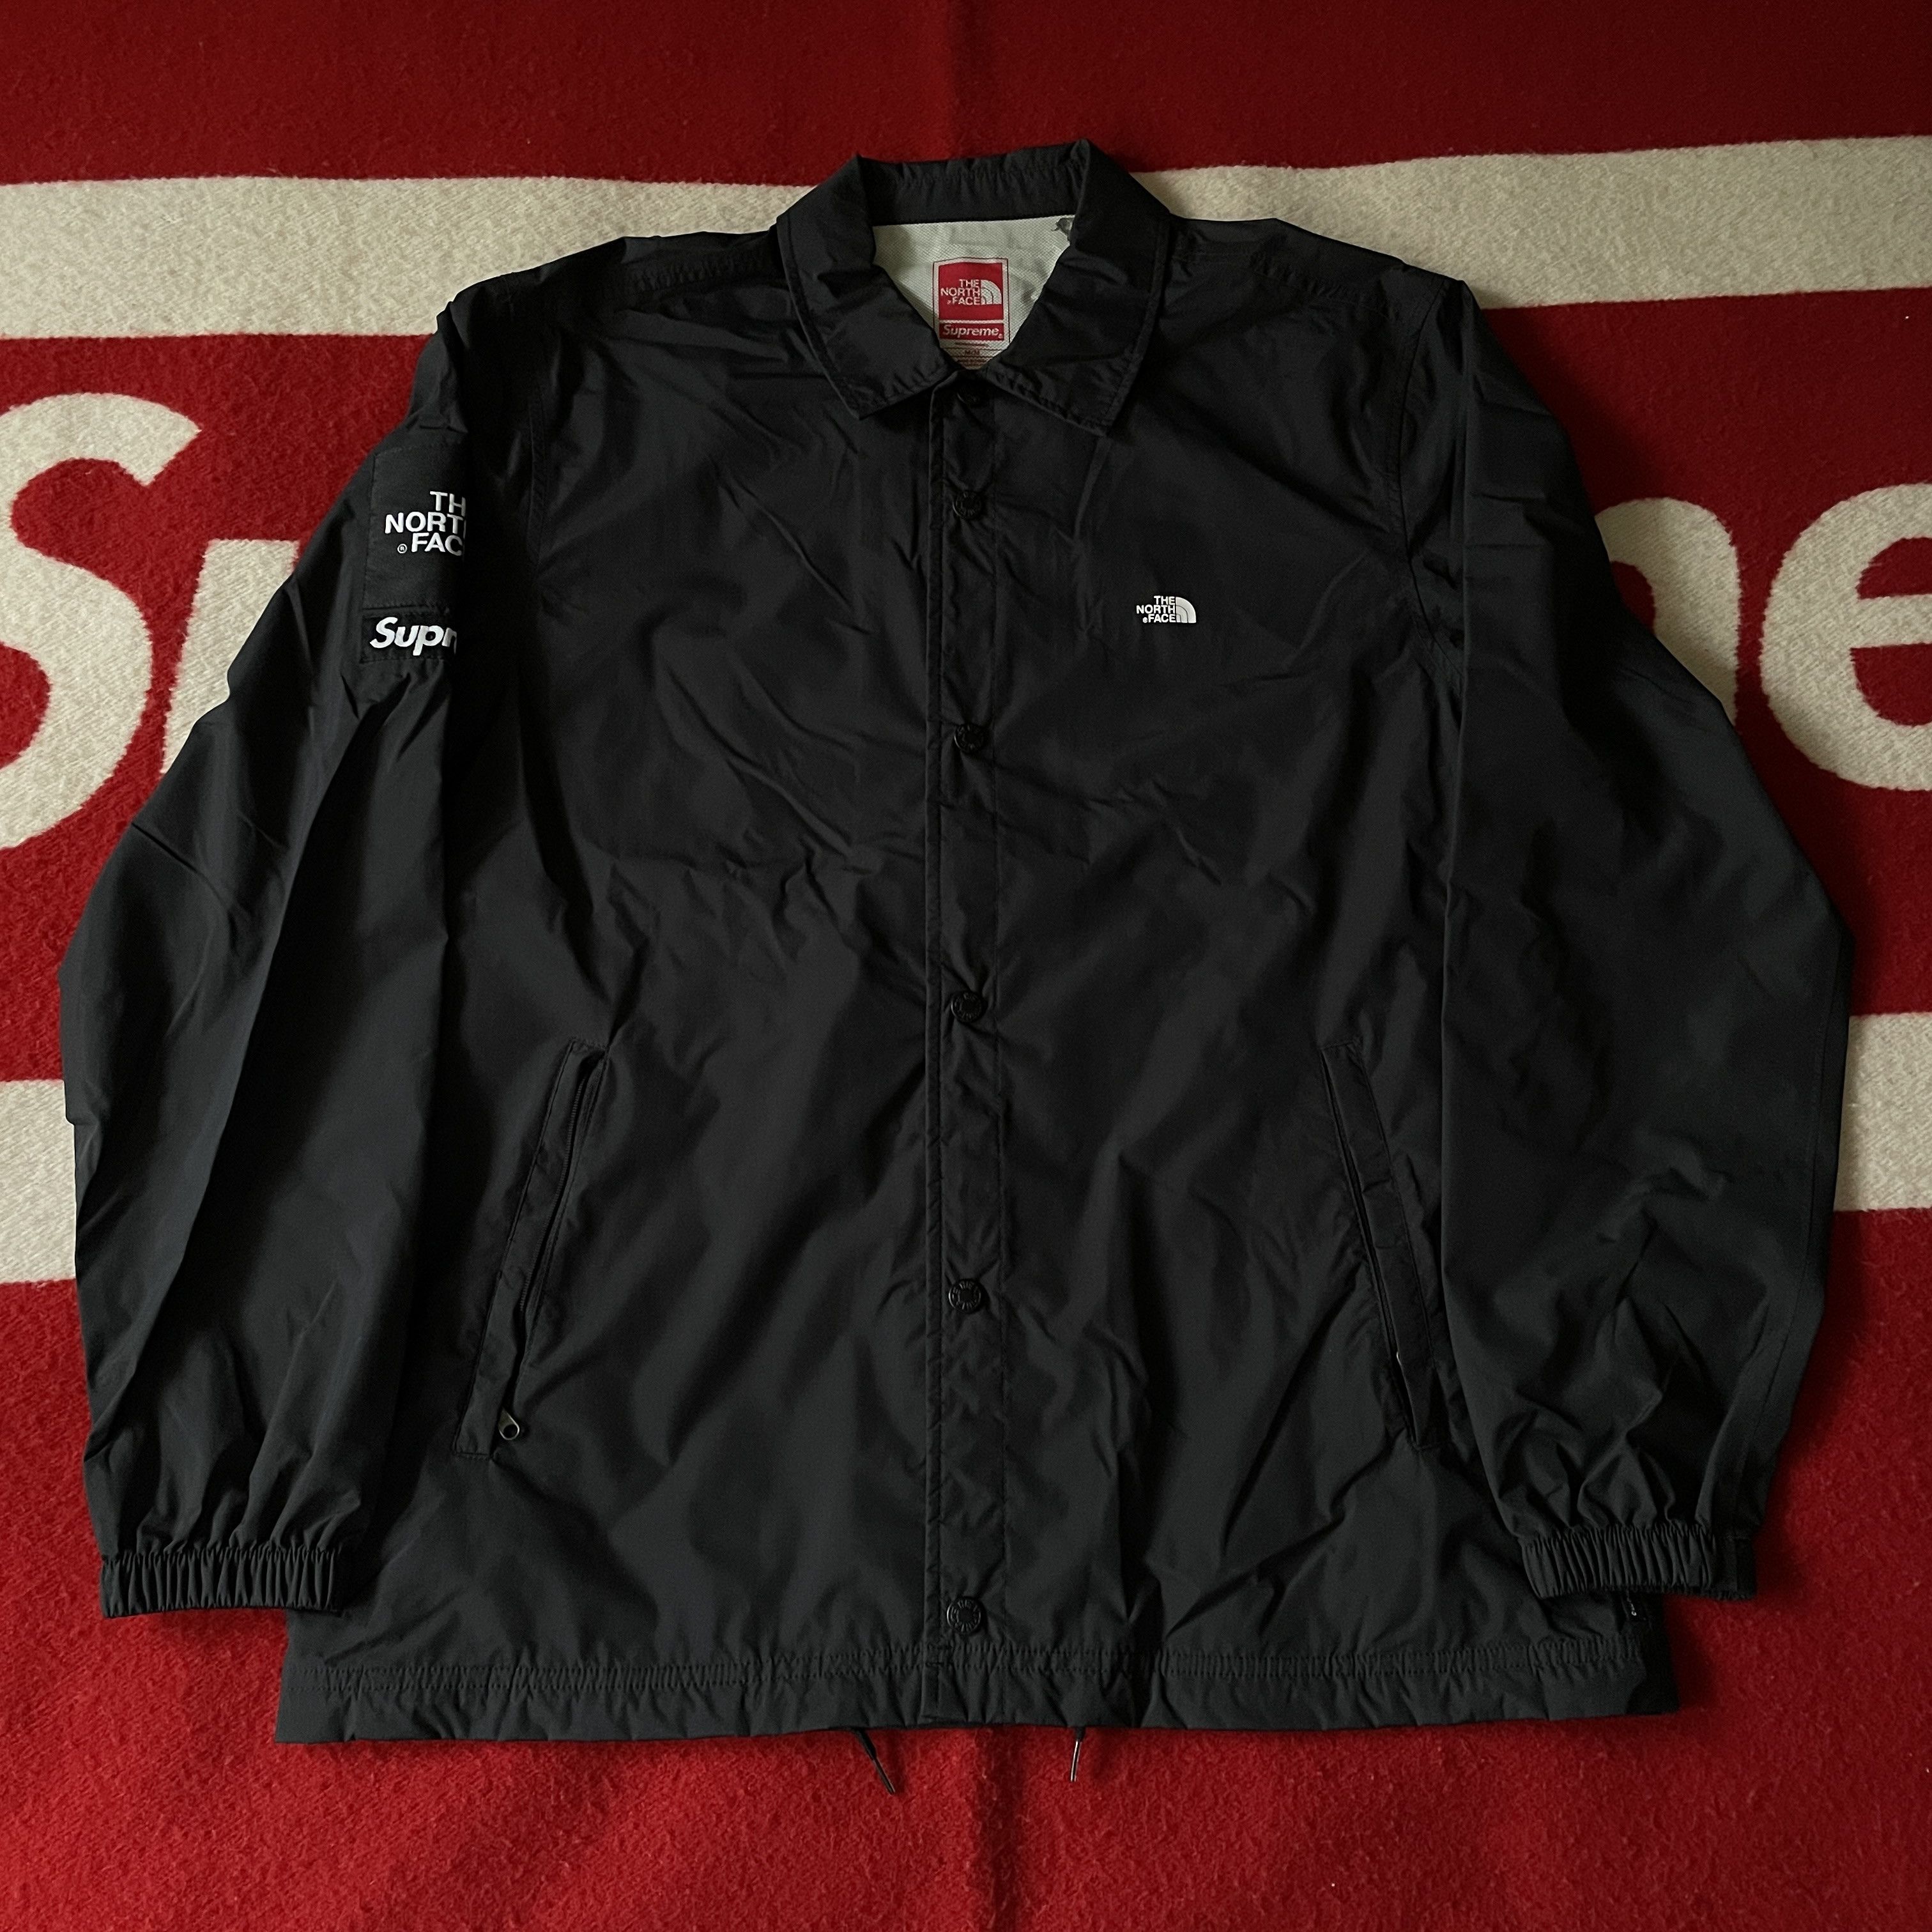 Supreme x The North Face 2015 Fall/Winter Collection